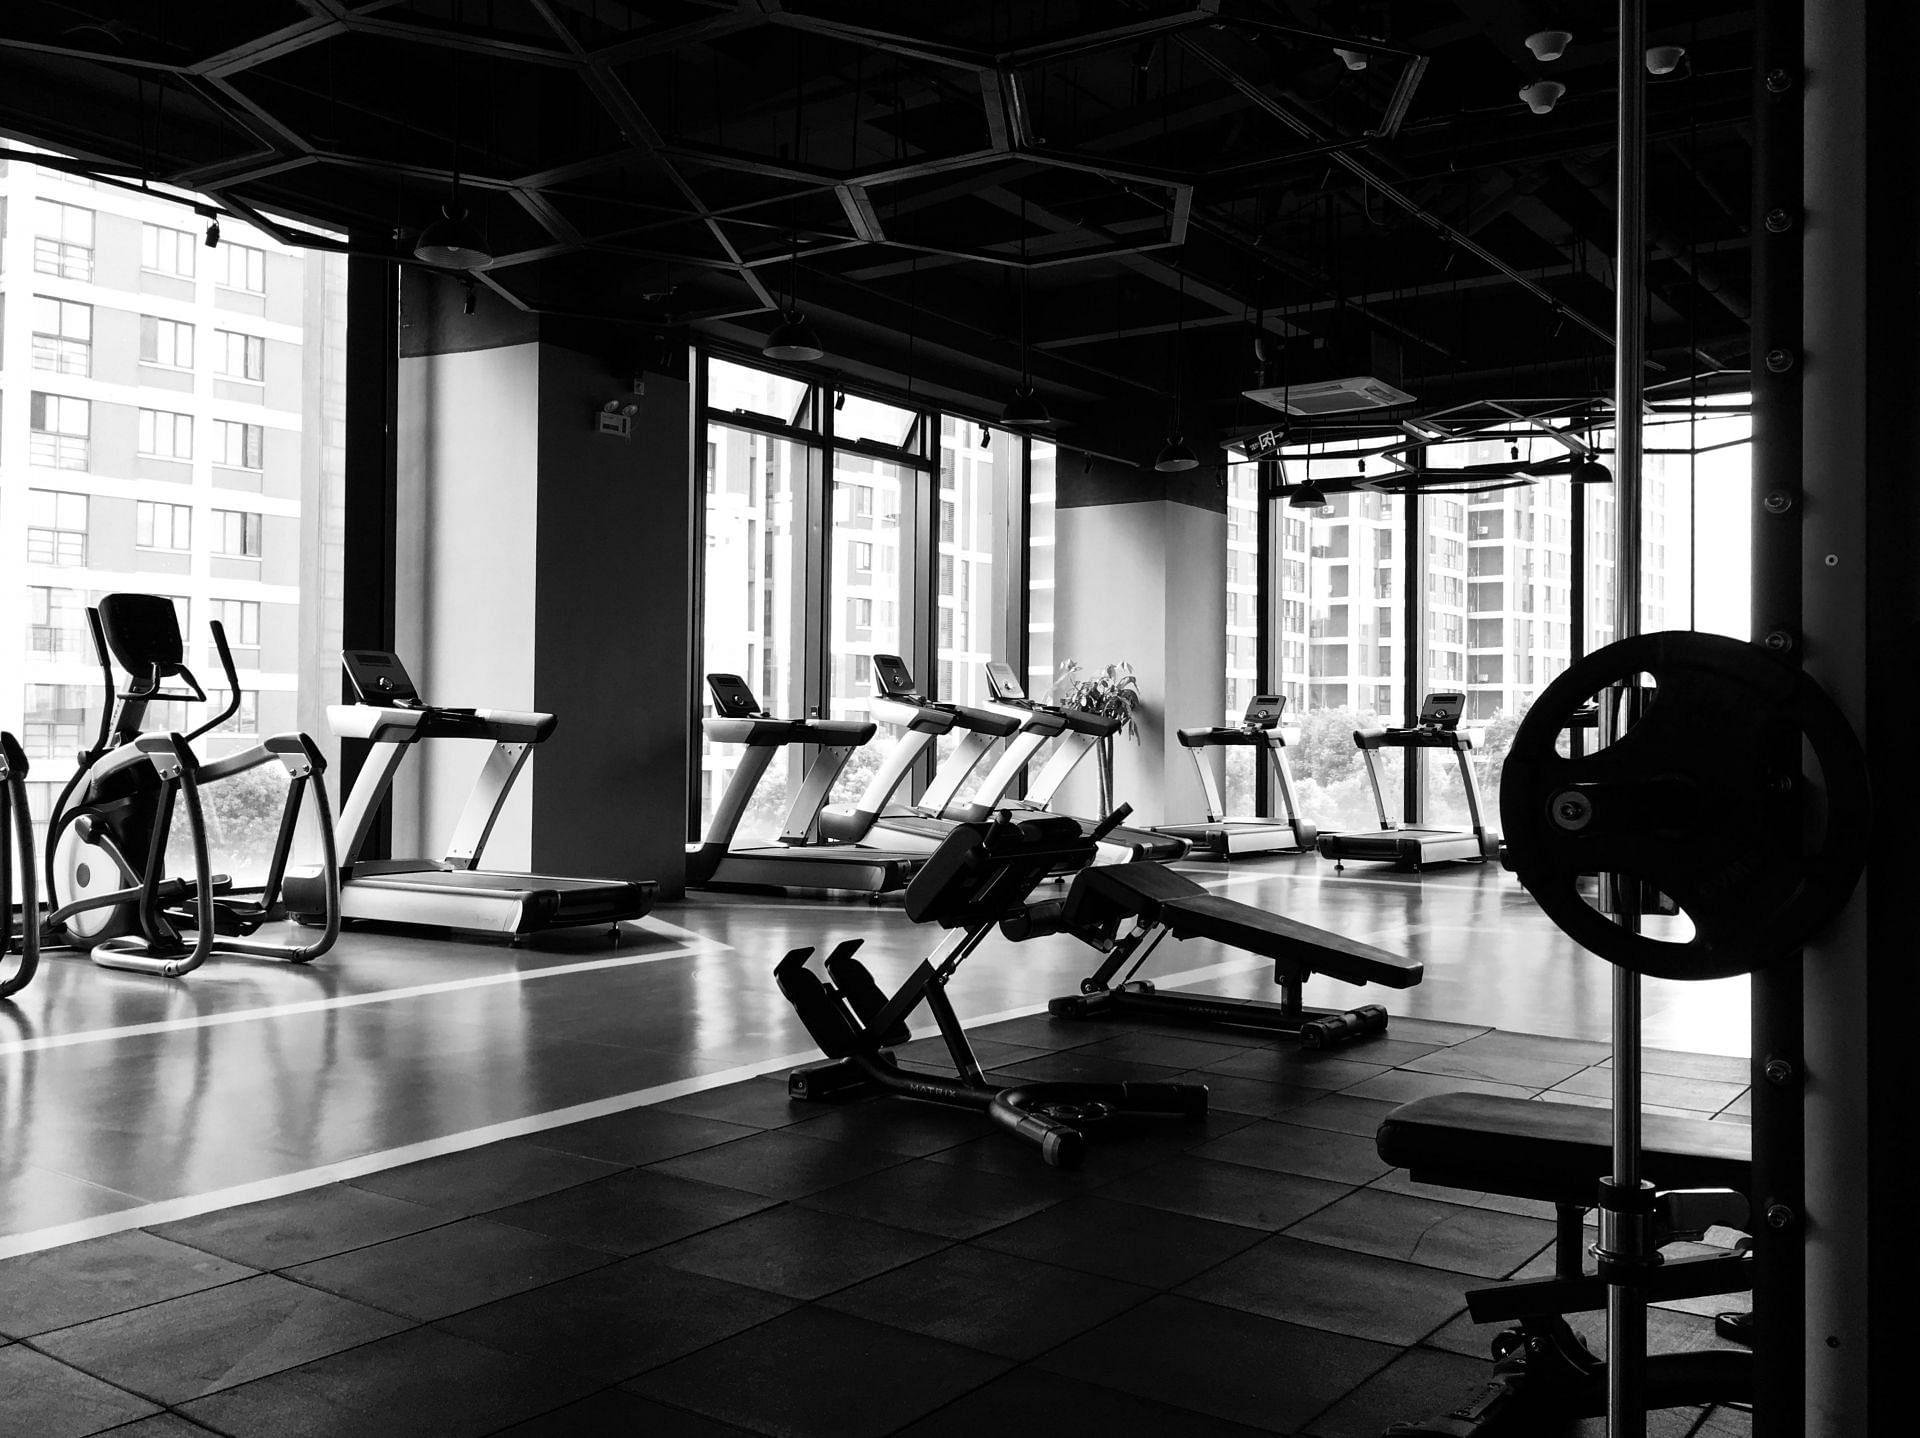 There are plenty of products available to make your home gym fantasies a reality. (Image via Unsplash/ Risen Wang)